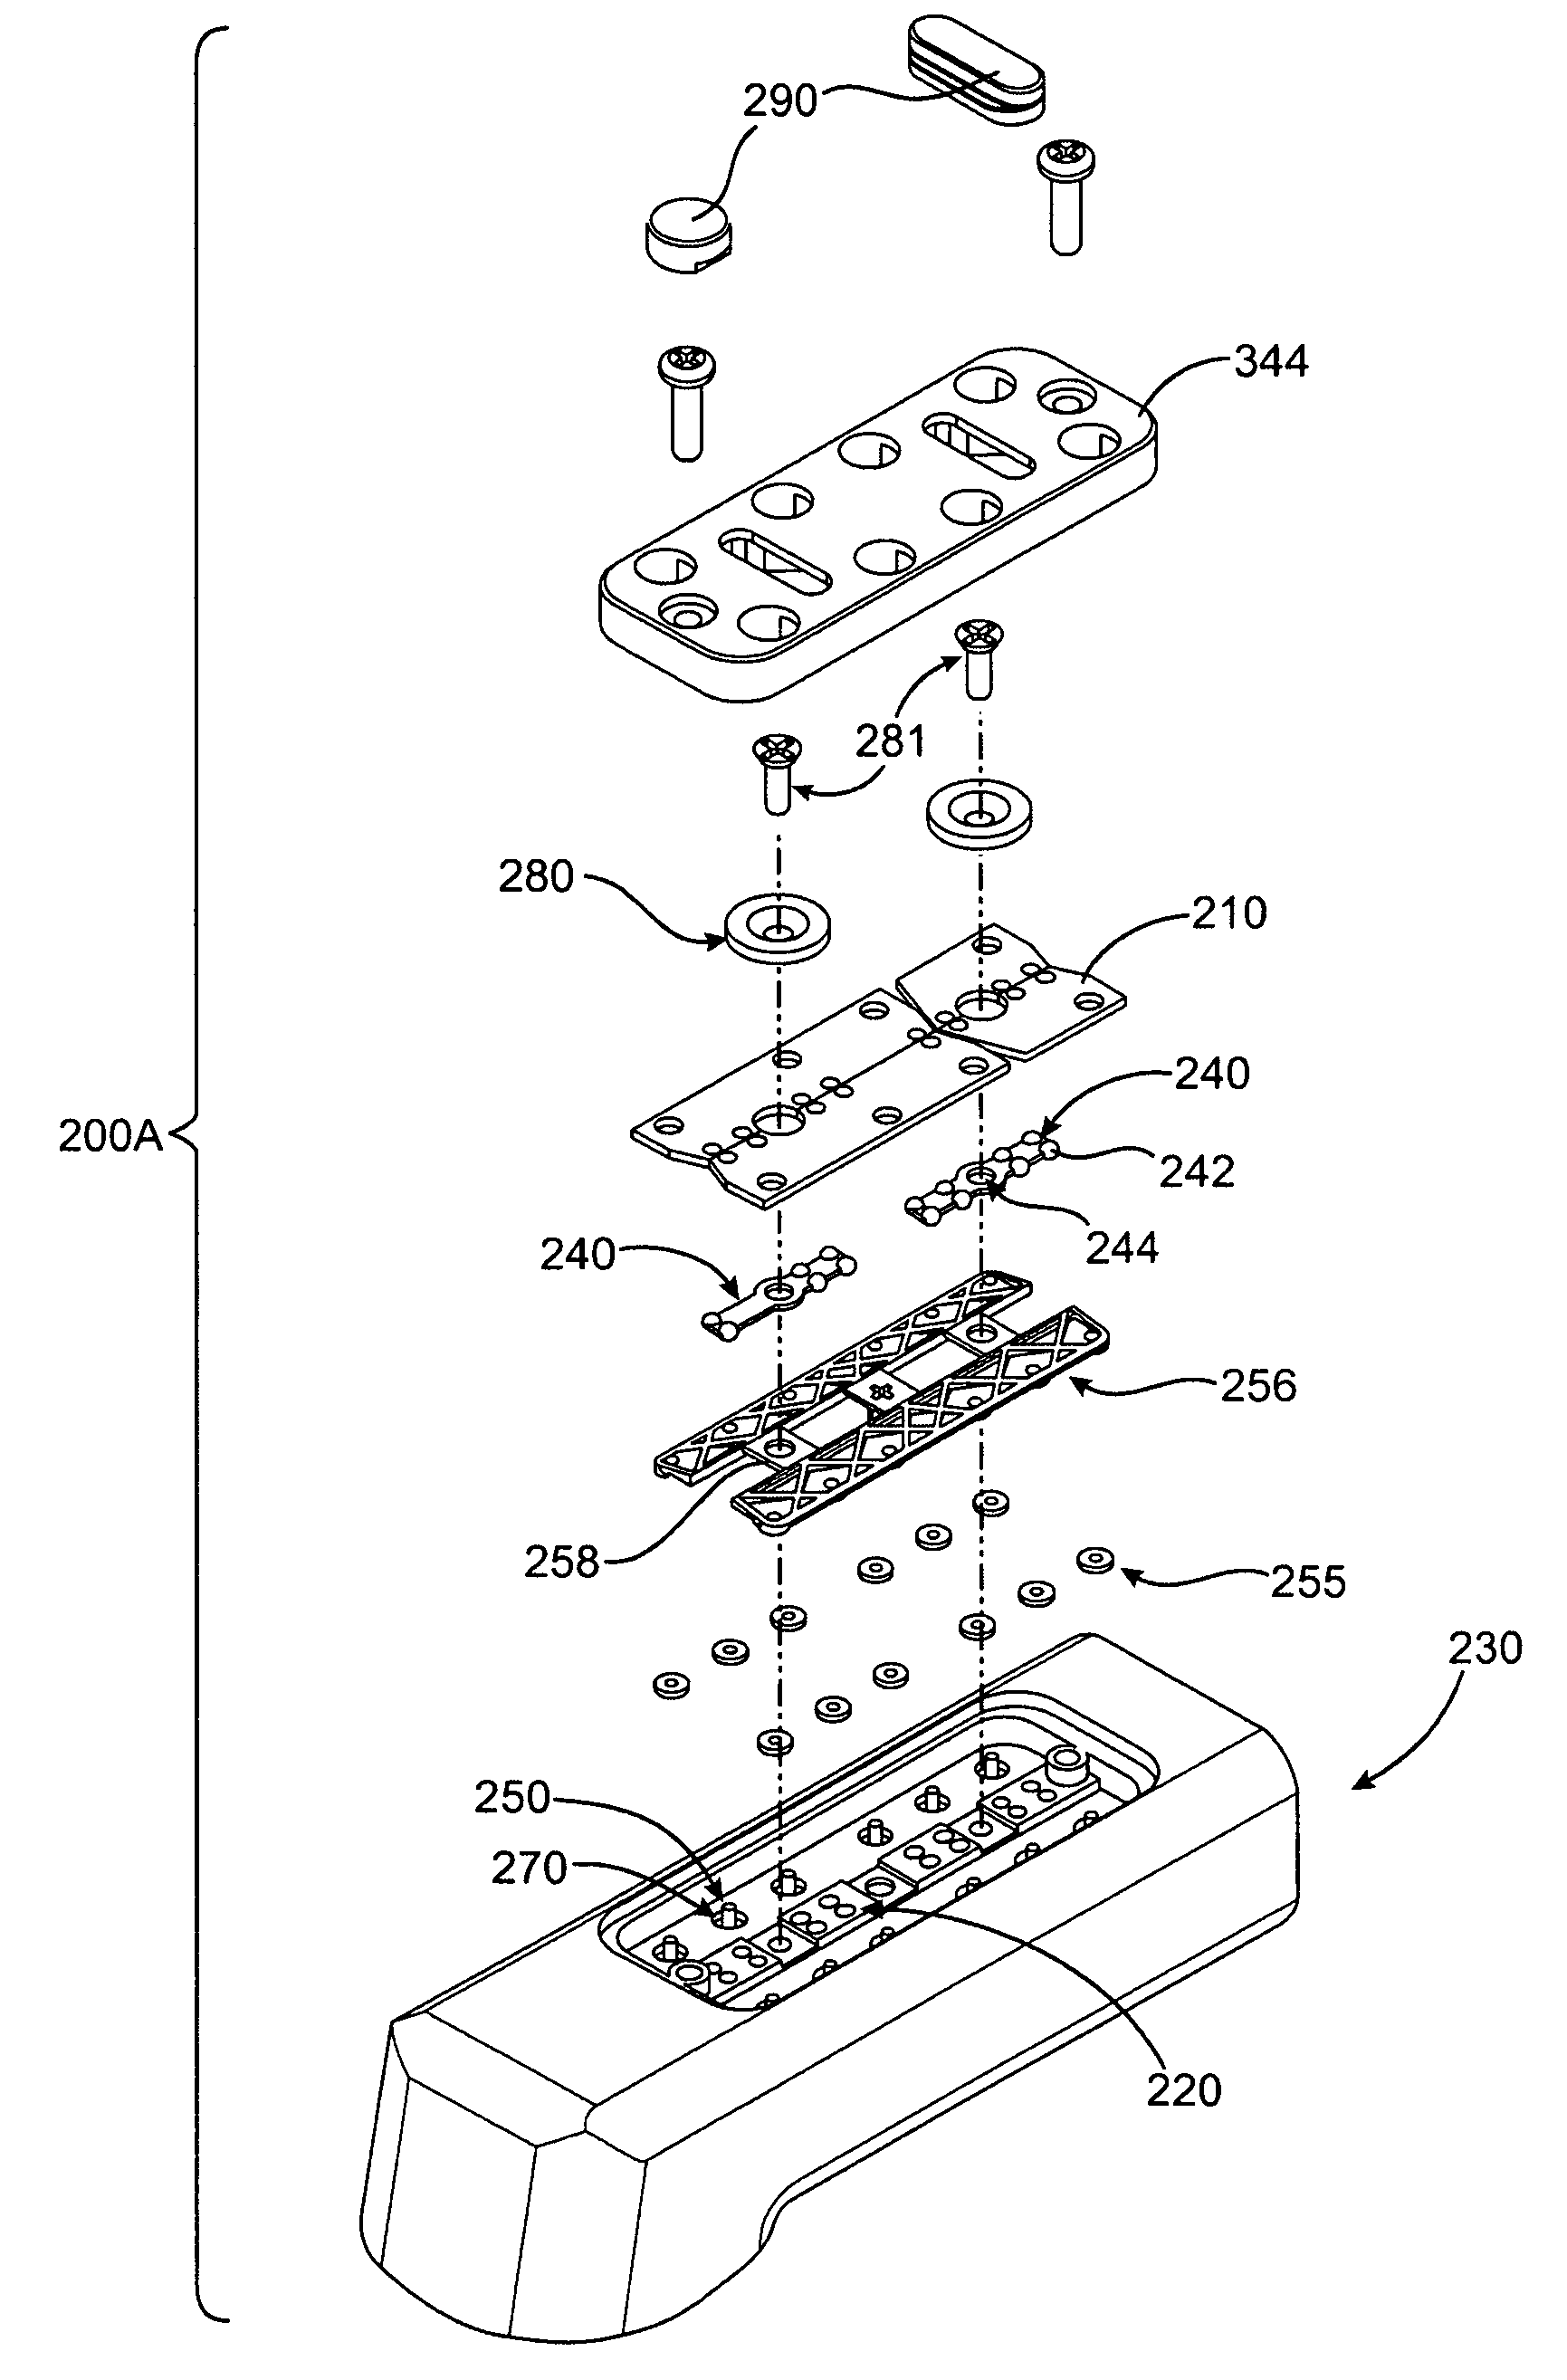 Beverage dispensing apparatus with butterfly plates and a molded O-ring retainer